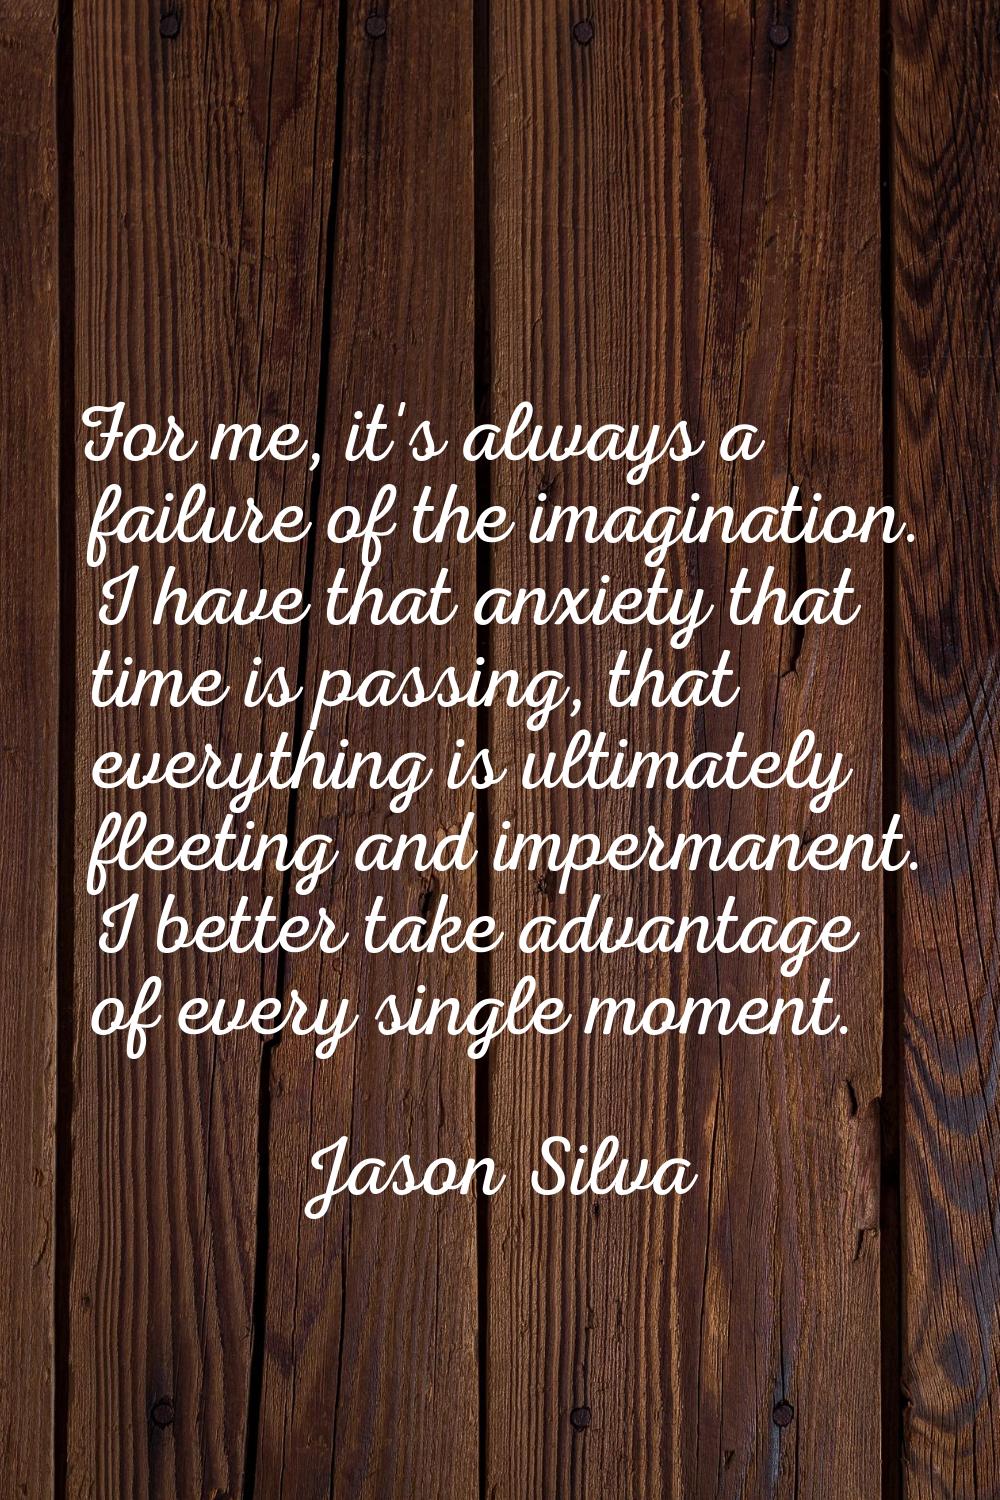 For me, it's always a failure of the imagination. I have that anxiety that time is passing, that ev